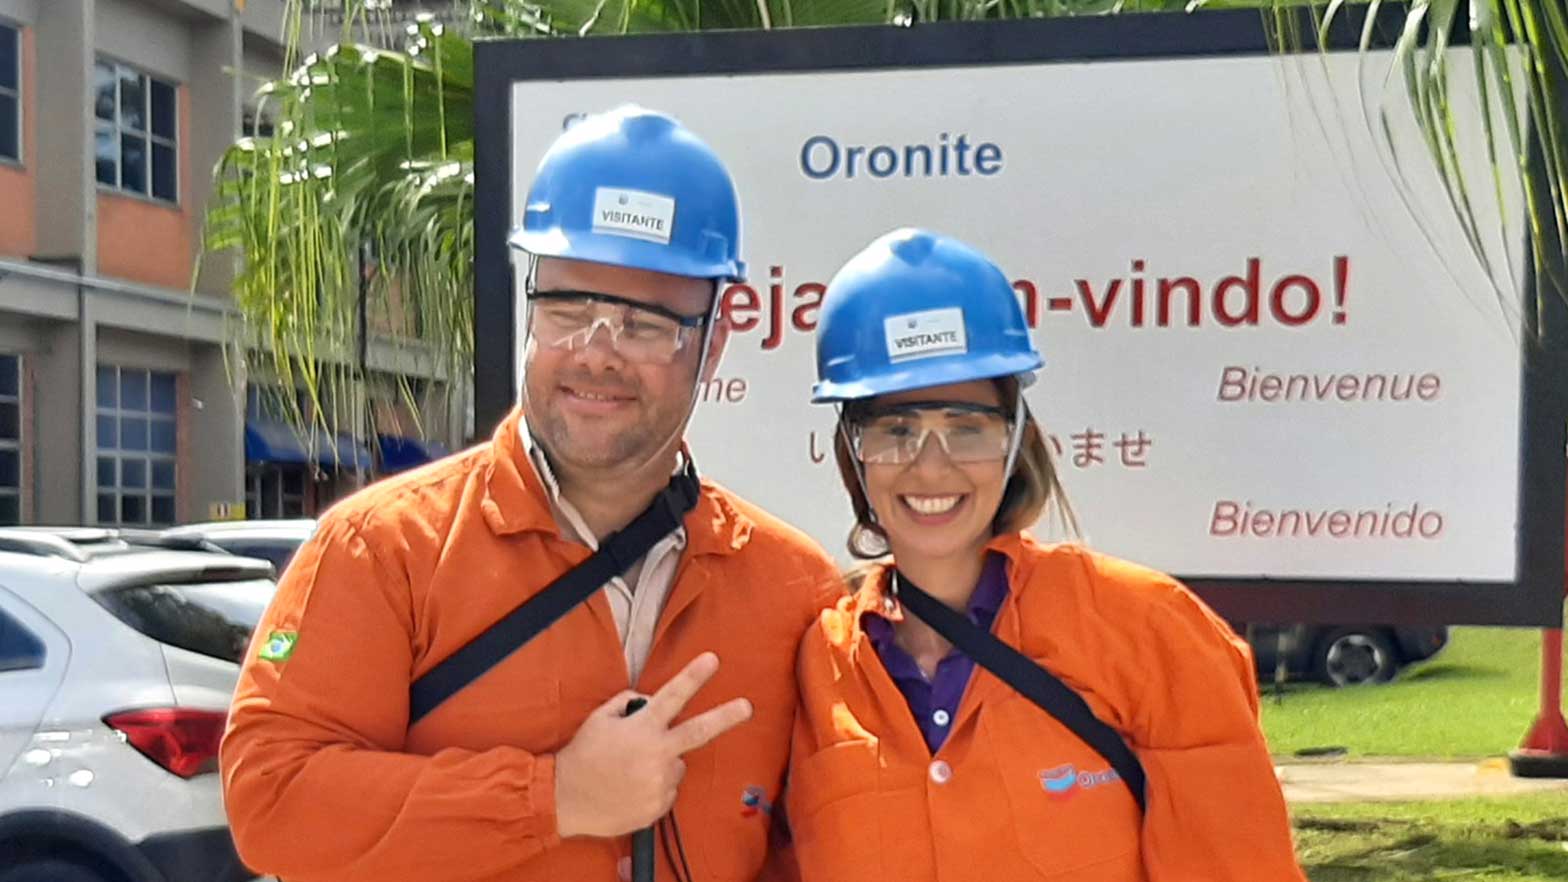 Leo Knittel and his colleague Priscila Netto visited Chevron’s Oronite plant in Mauà, São Paulo, Brazil. The pair were onsite to promote our new ENABLED South America chapter.